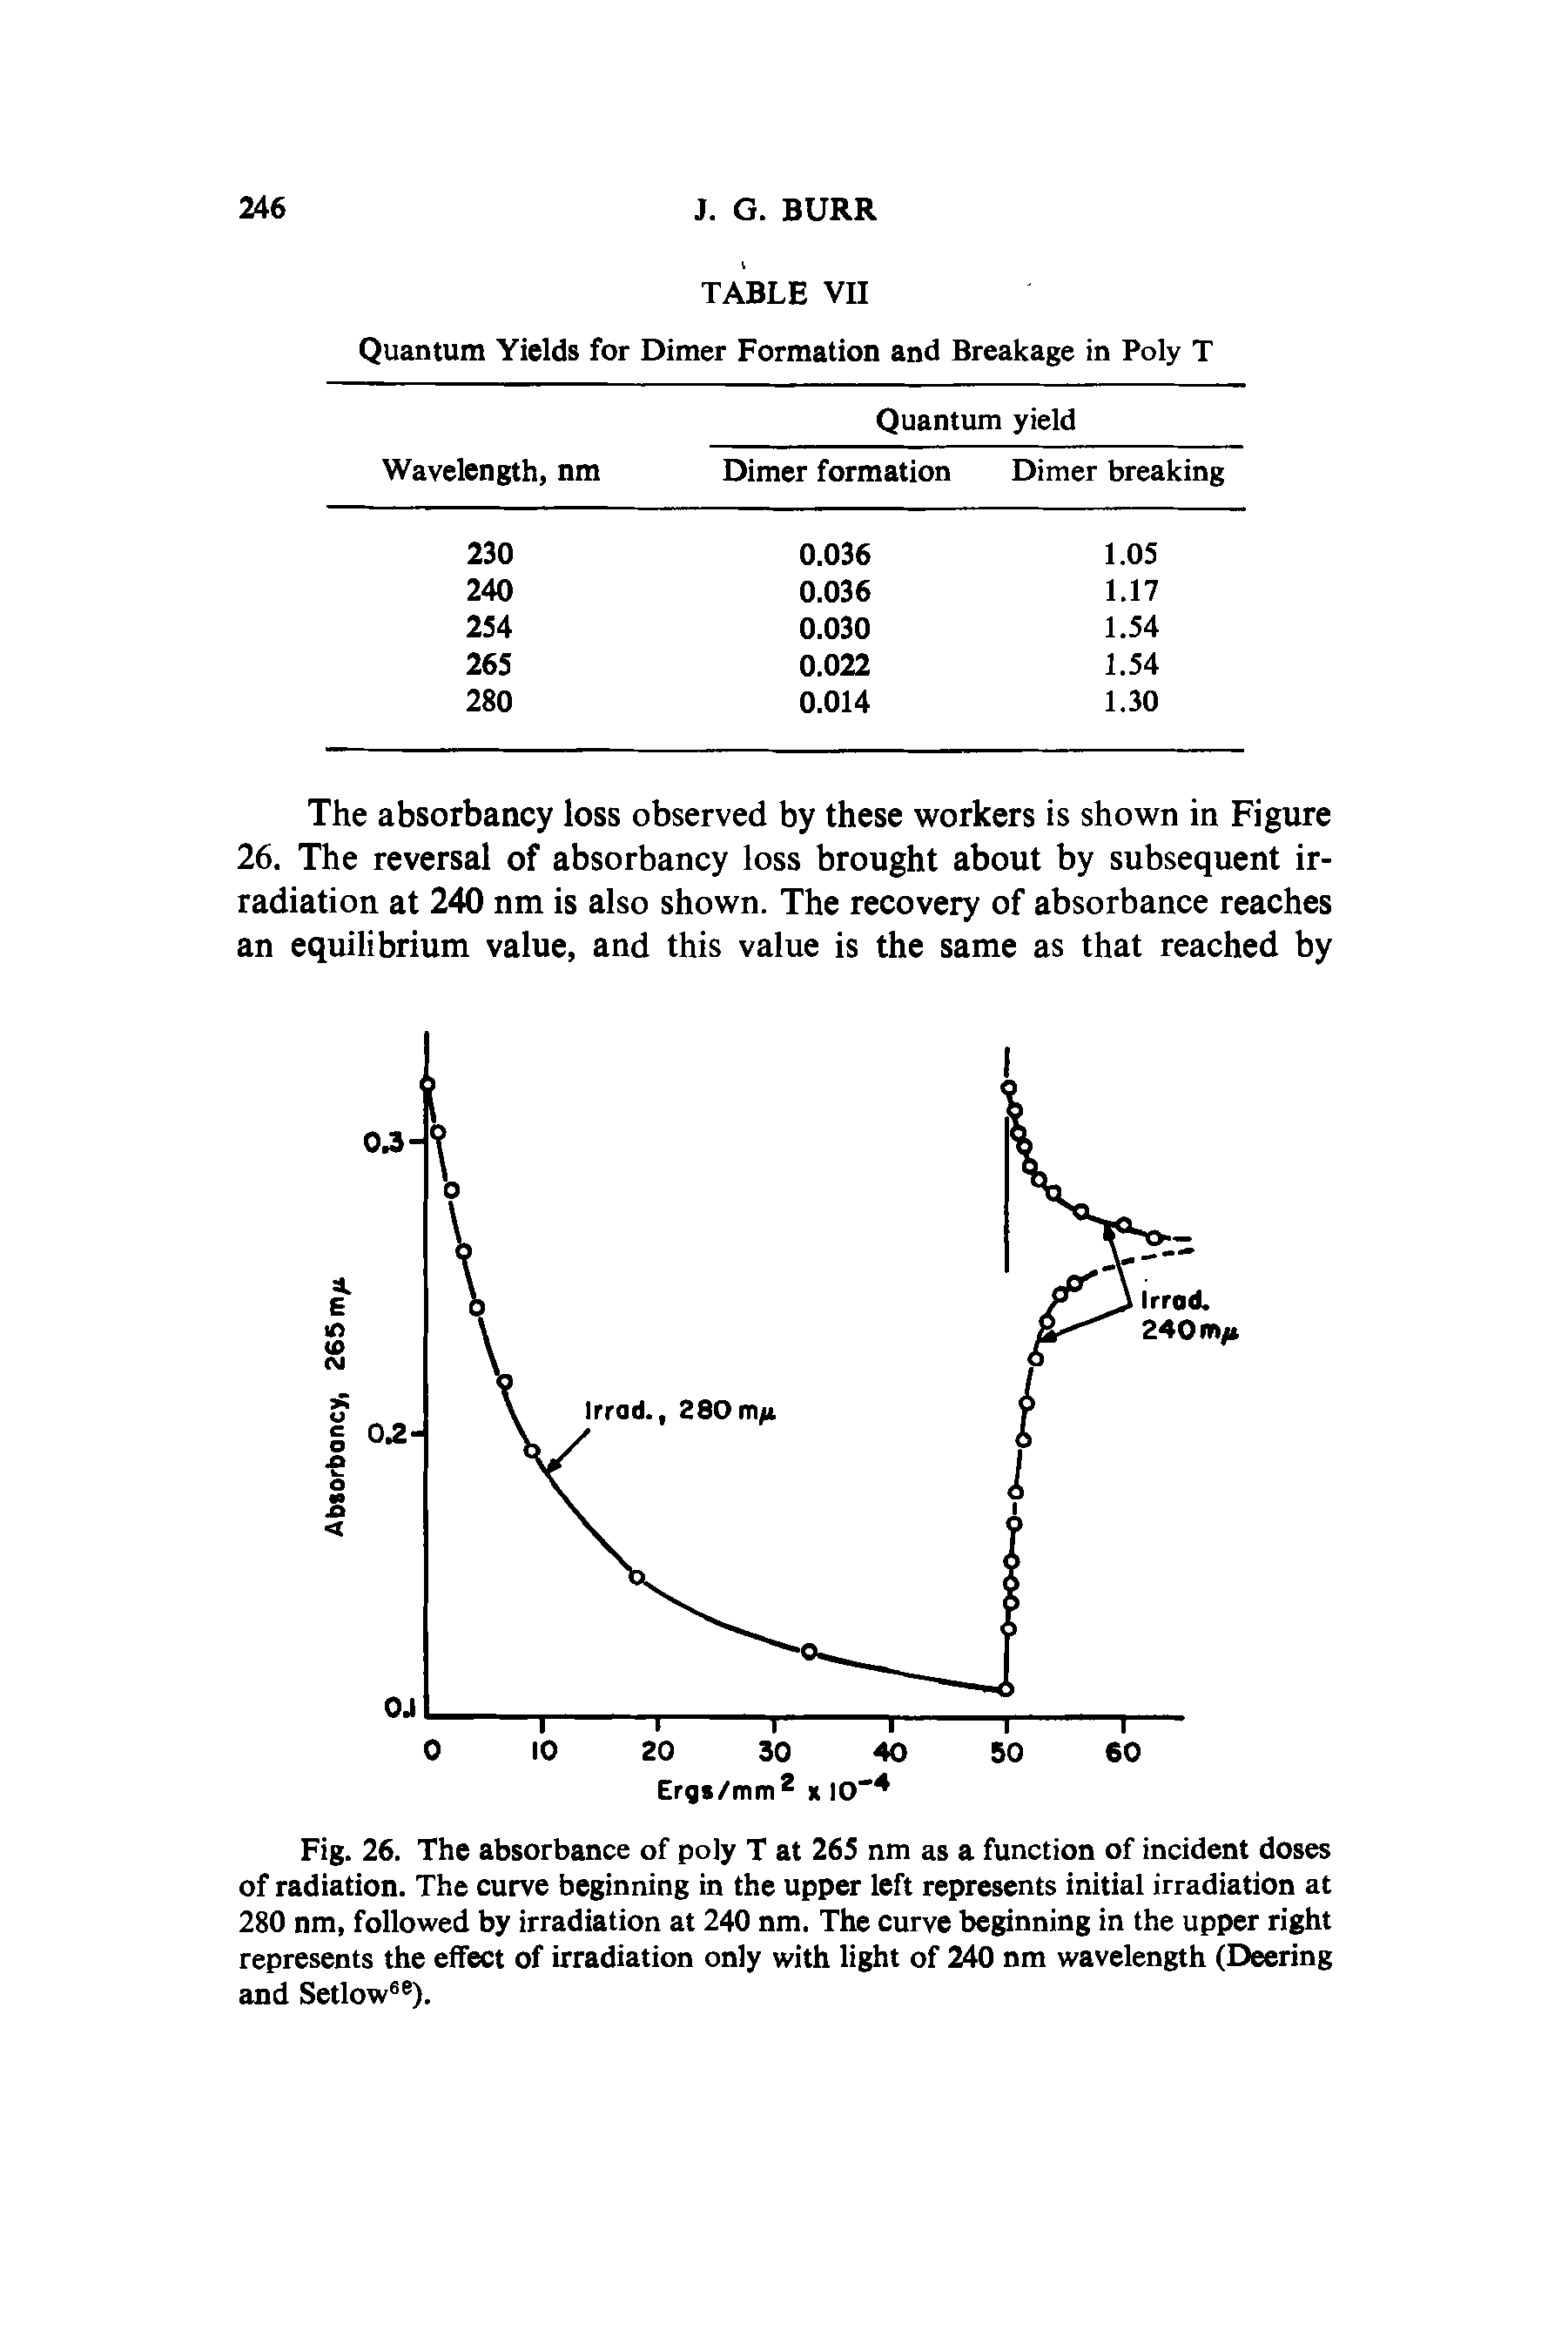 Fig. 26. The absorbance of poly T at 265 nm as a function of incident doses of radiation. The curve beginning in the upper left represents initial irradiation at 280 nm, followed by irradiation at 240 nm. The curve beginning in the upper right represents the effect of irradiation only with light of 240 nm wavelength (Deering and Setlow6e).